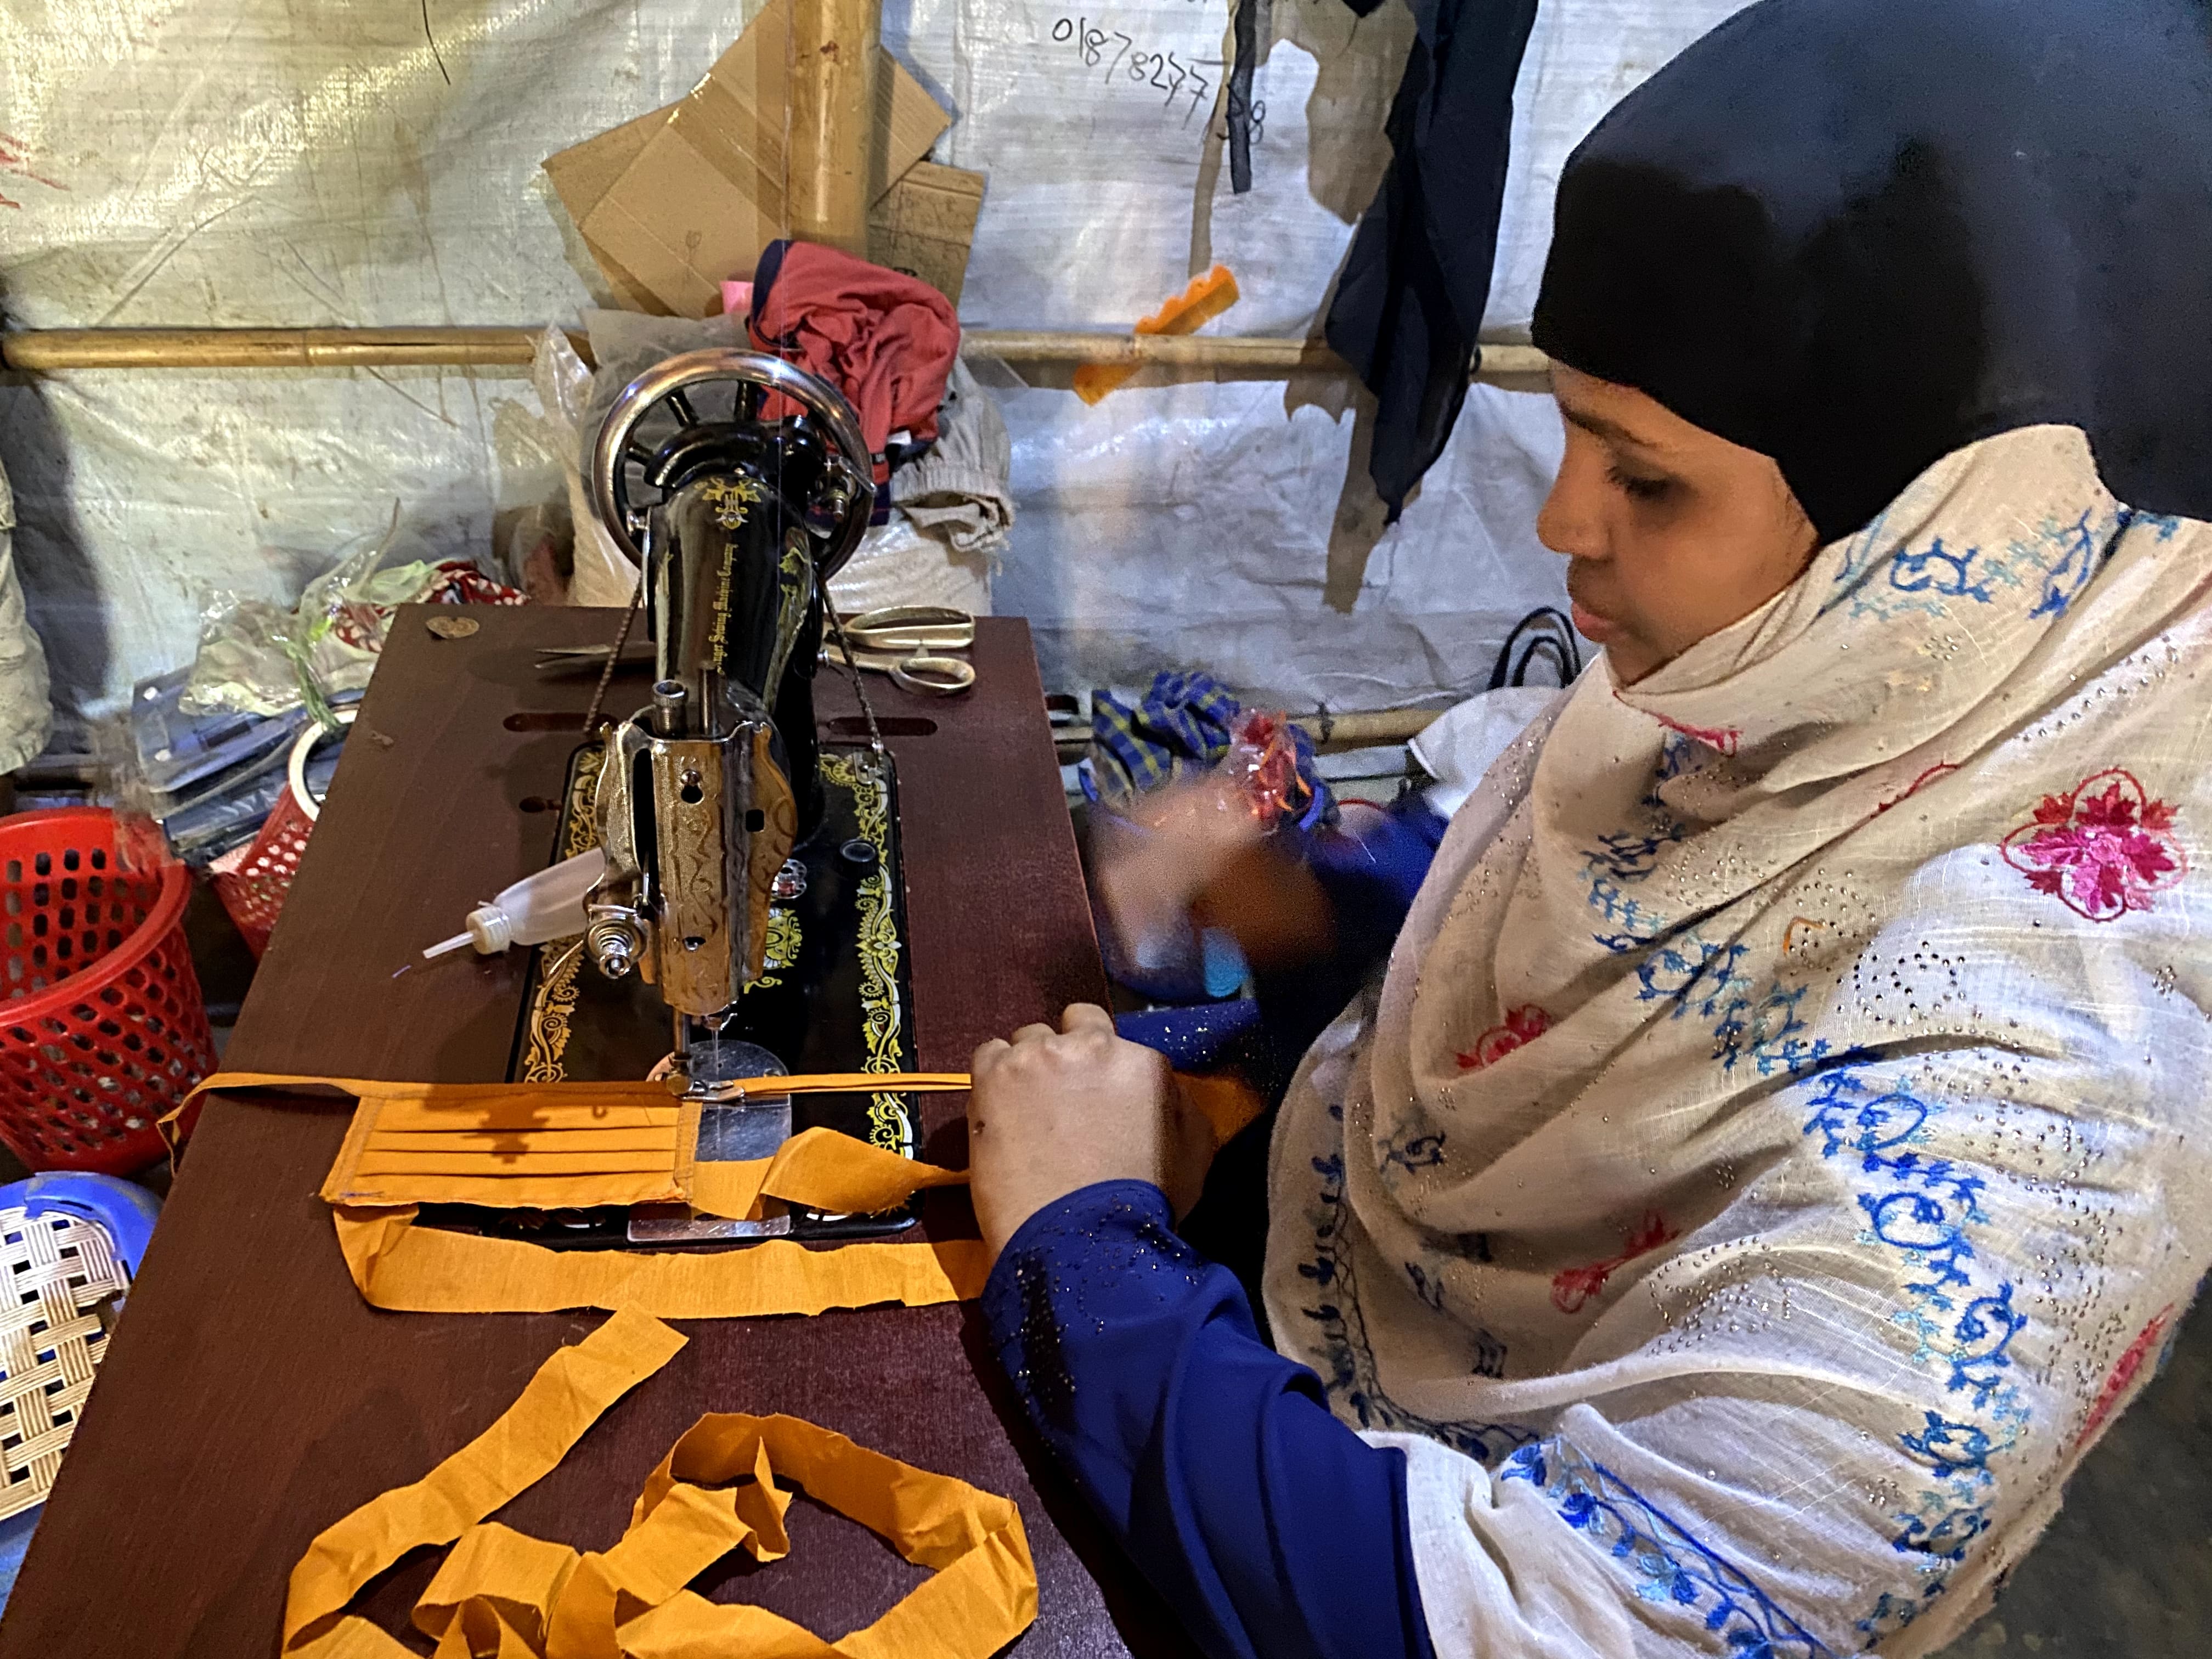 Bangladesh: To improve access to income and allow households to meet their basic needs, Oxfam is providing local women’s and men’s groups in Cox’s Bazar with equipment and training to produce reusable masks and sanitary napkins. (Photo: Mutasim Billah / Oxfam)